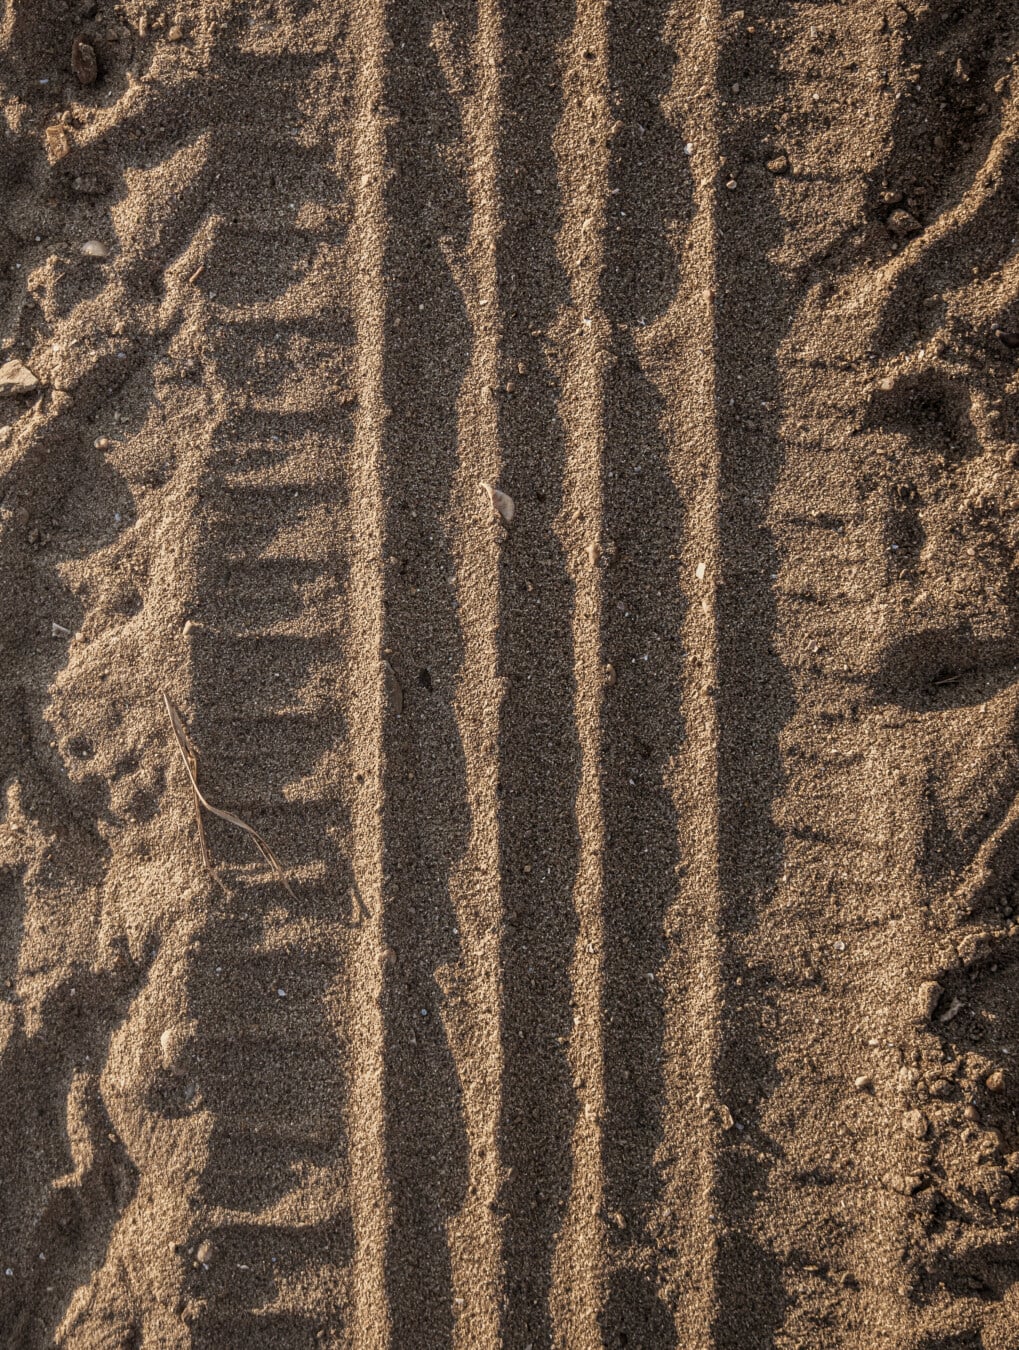 soil, sand, dirty, shadow, texture, rough, pattern, ground, material, brown